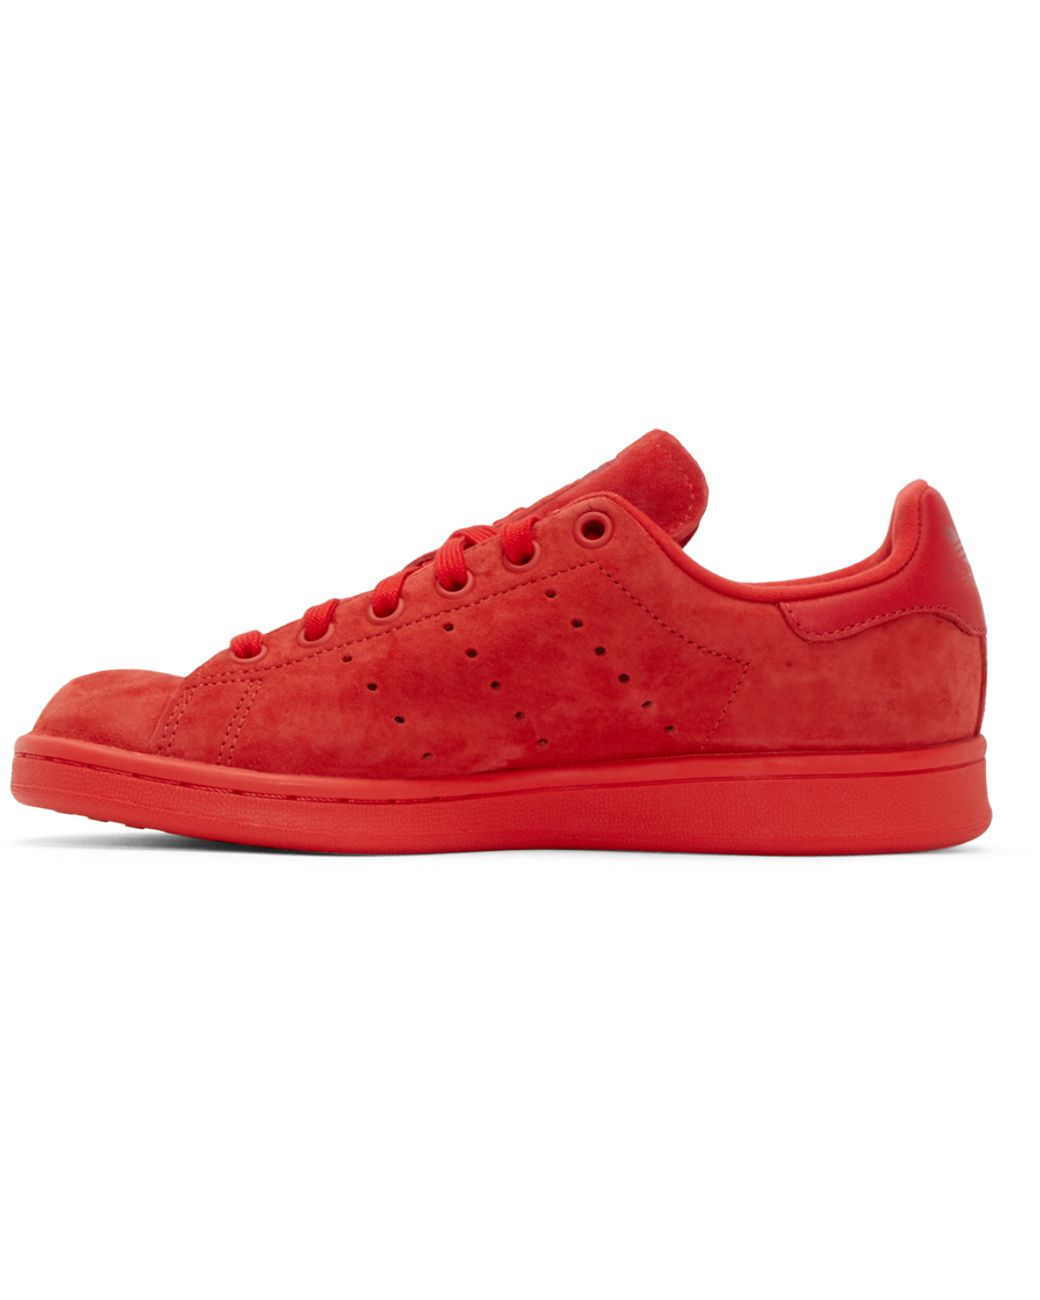 adidas Originals Red Suede Stan Smith Sneakers | Lyst